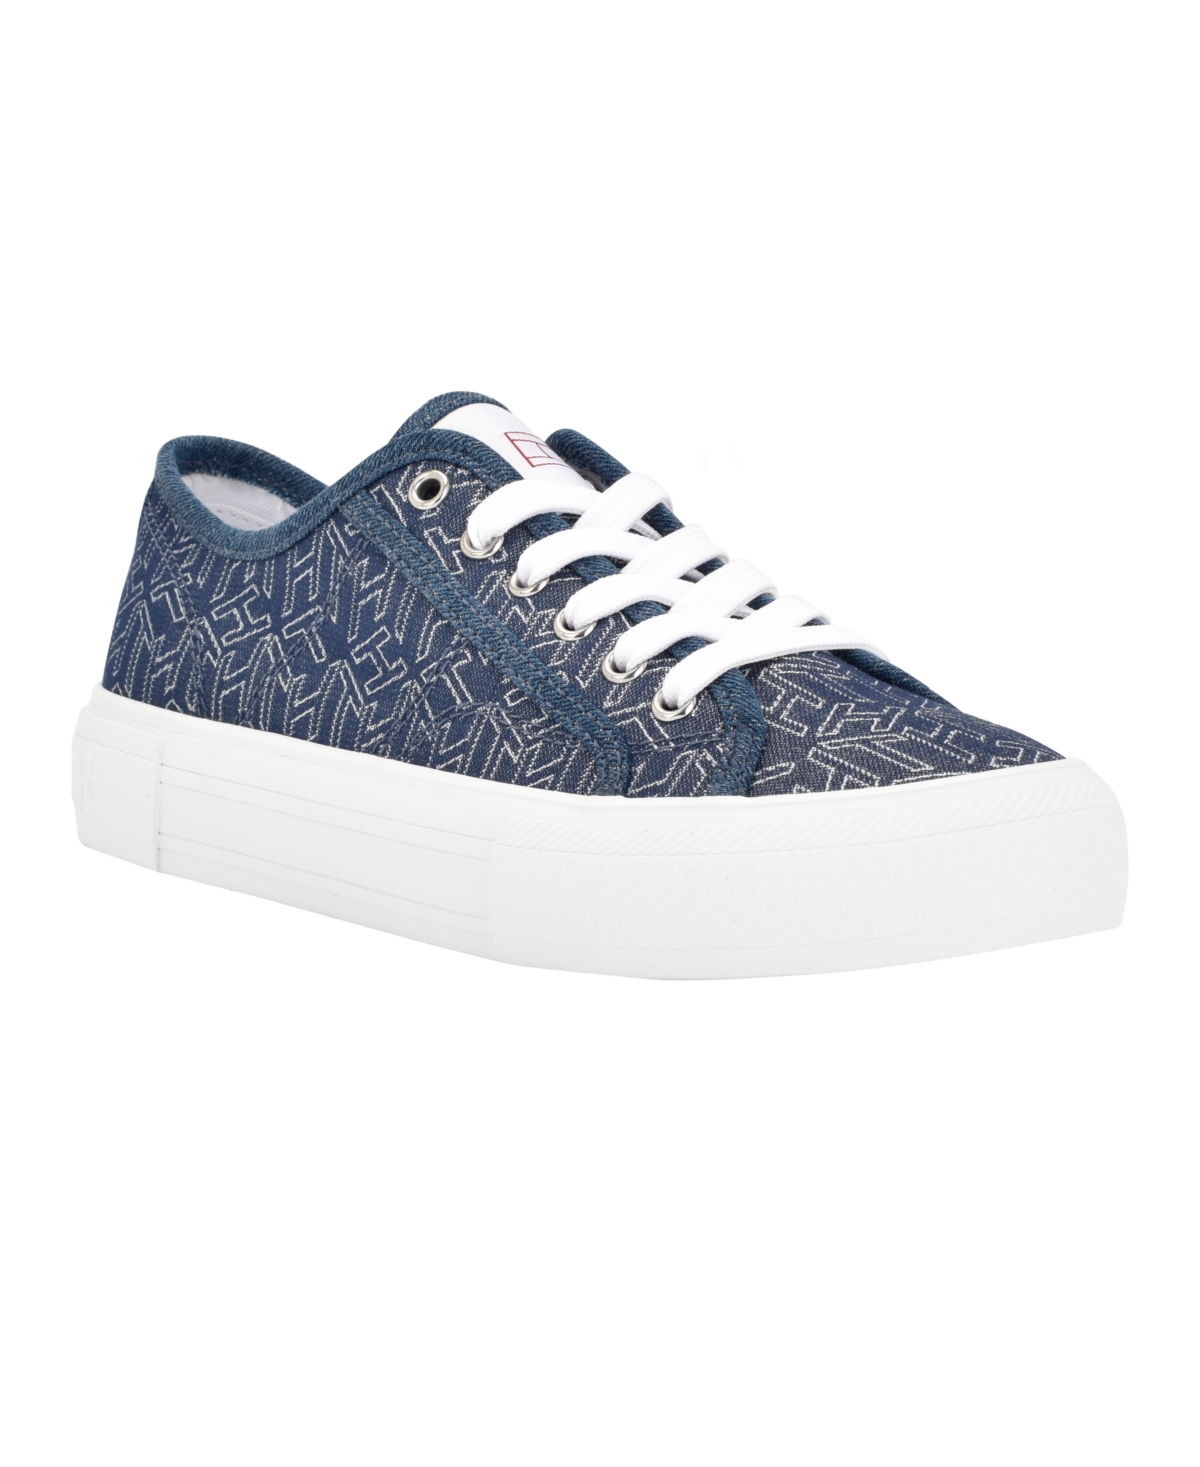 UPC 197016282916 product image for Tommy Hilfiger Women's Alessy Casual Lace Up Sneakers Women's Shoes | upcitemdb.com